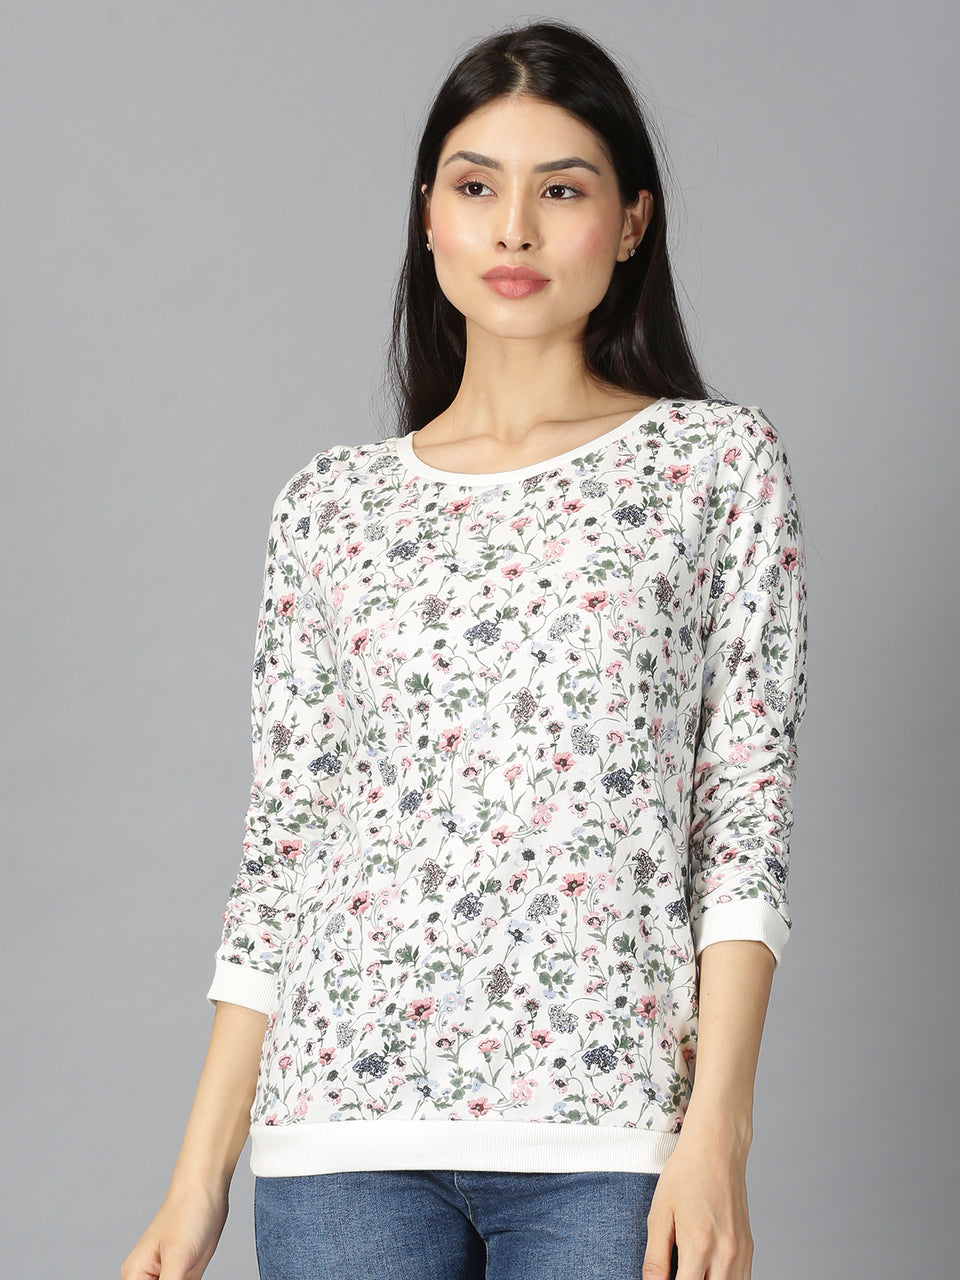 Women White Floral Printed Round Neck Casual T-Shirt